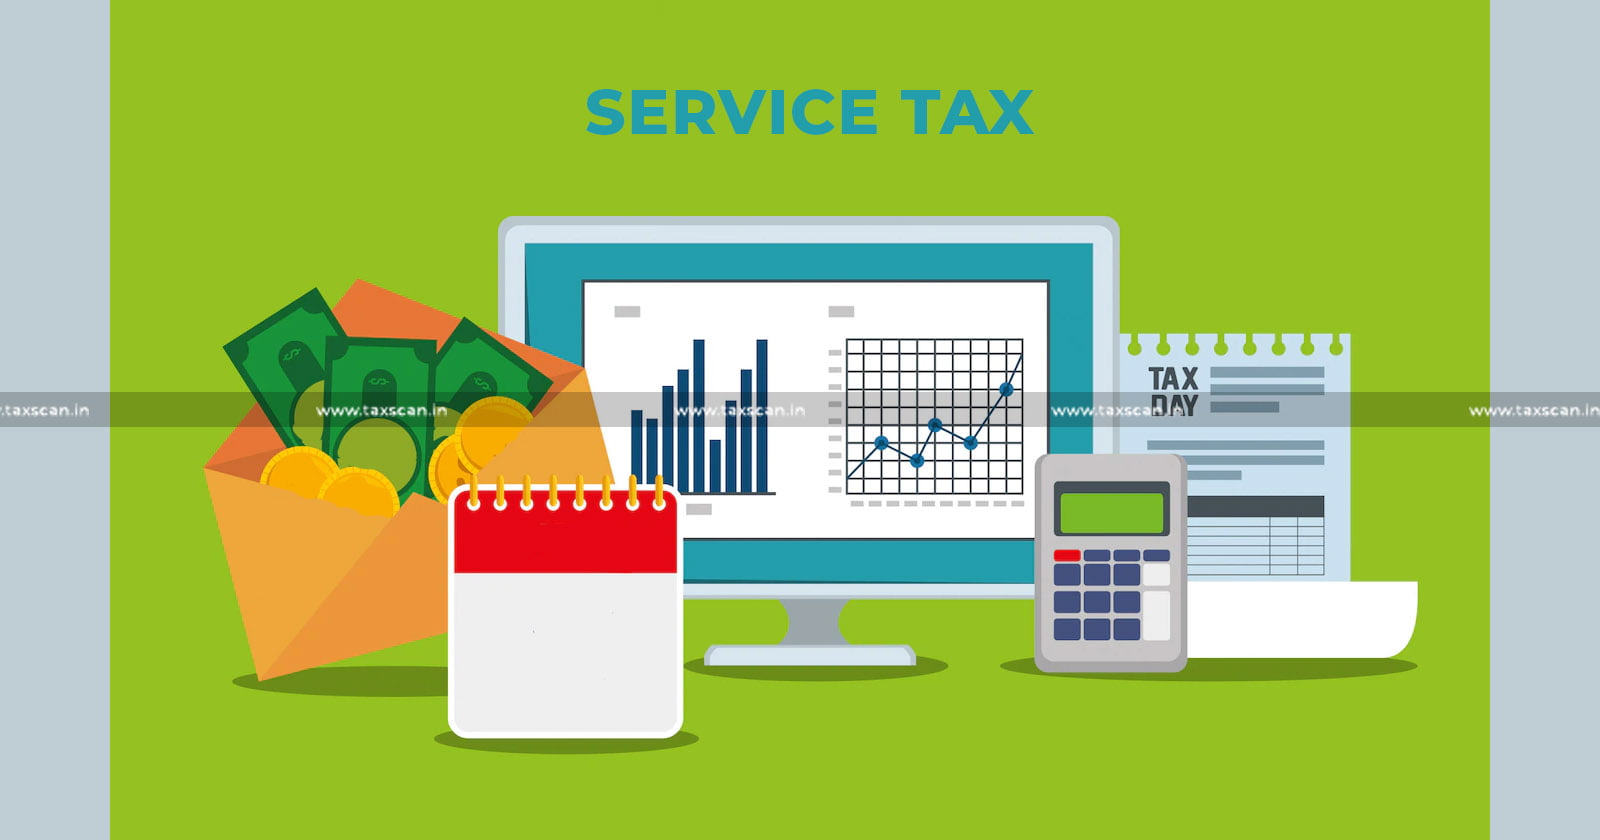 Extended period of Limitation - Invokable in Absence - Service Tax - CESTAT - TAXSCAN